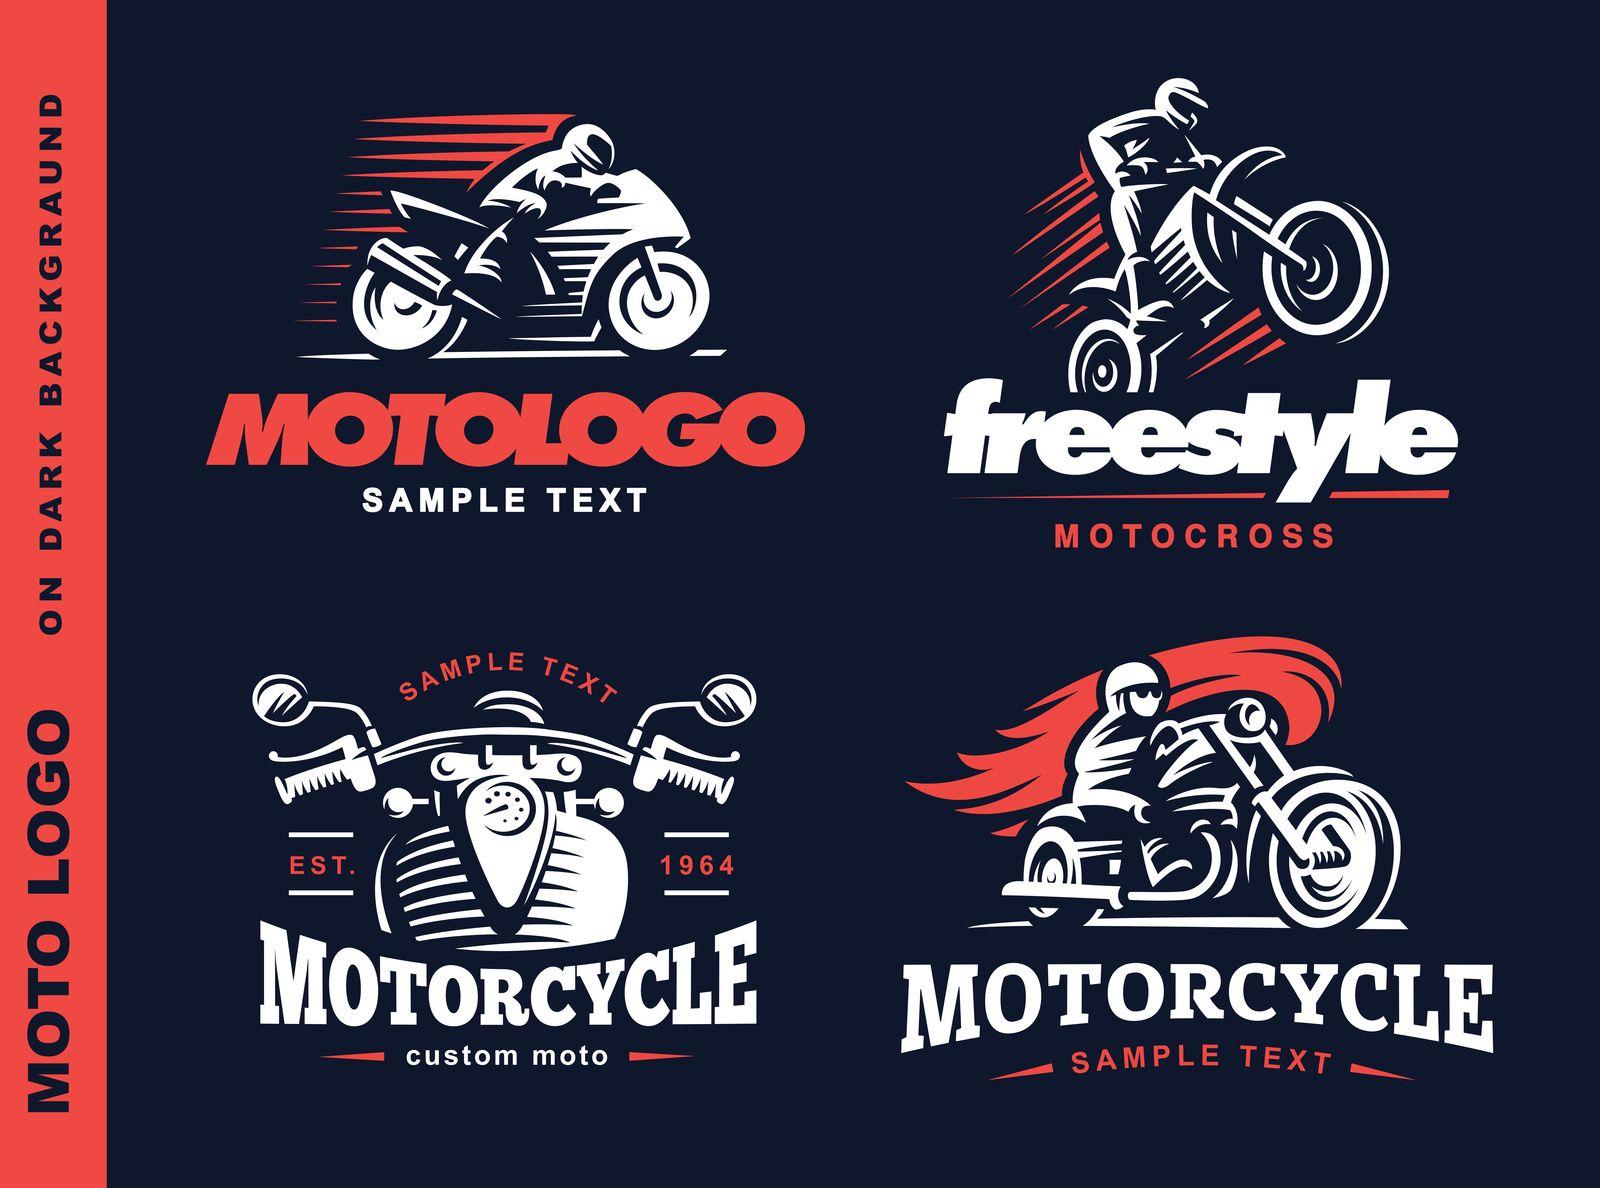 All Motorcycle Logo - 5 Must-Know Facts About Famous Motorcycle Logos • Online Logo ...